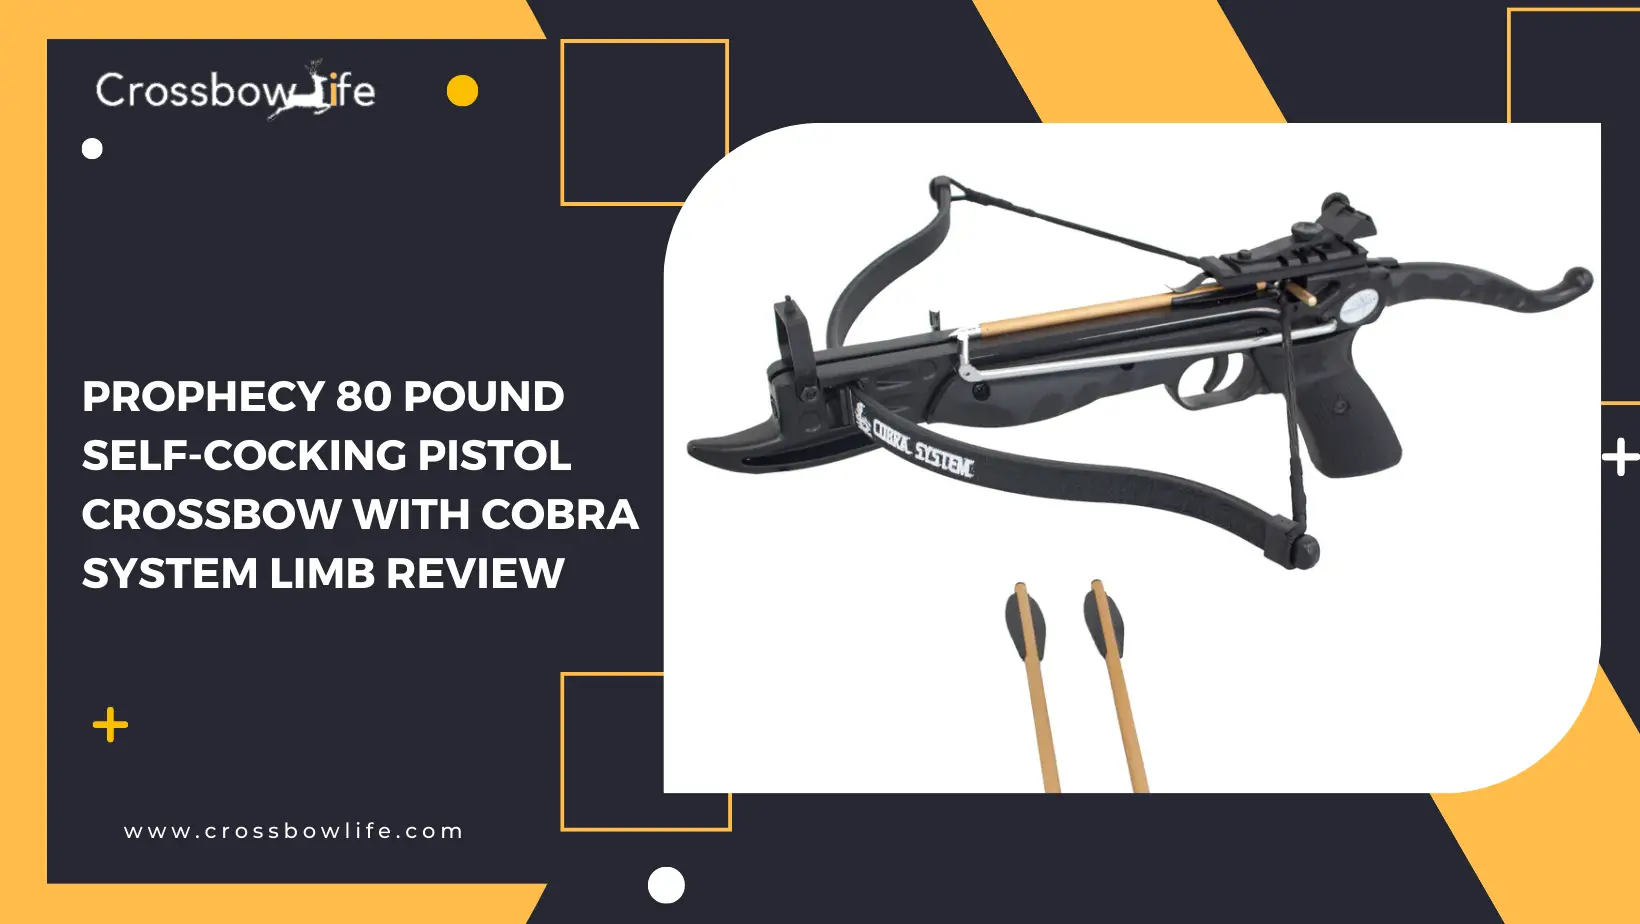 Prophecy 80 Pound Self-cocking Pistol Crossbow with Cobra System Limb Review